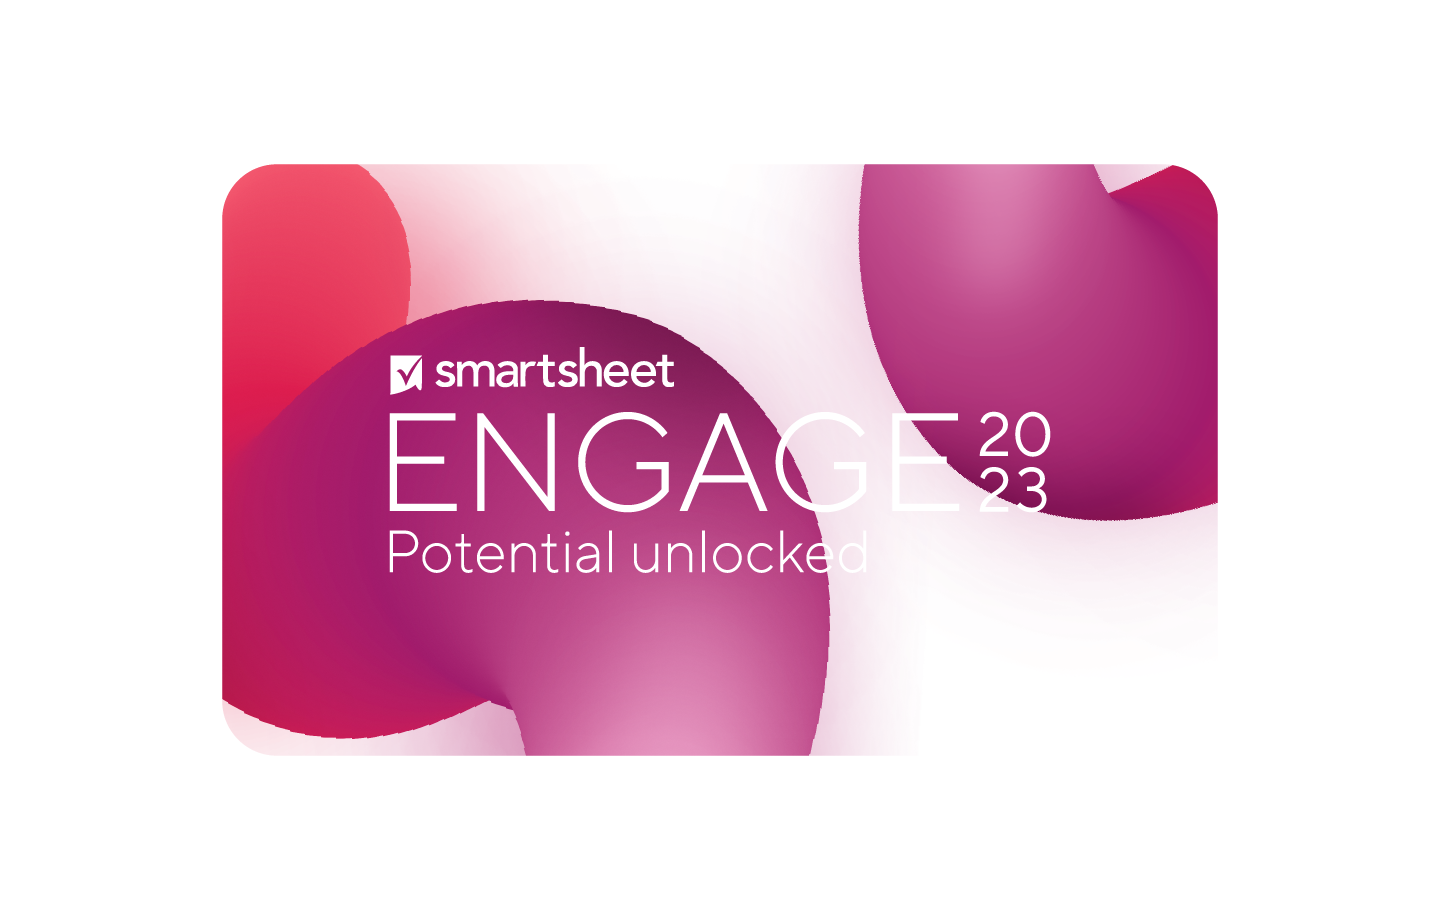 Engage 2023: Potential unlocked